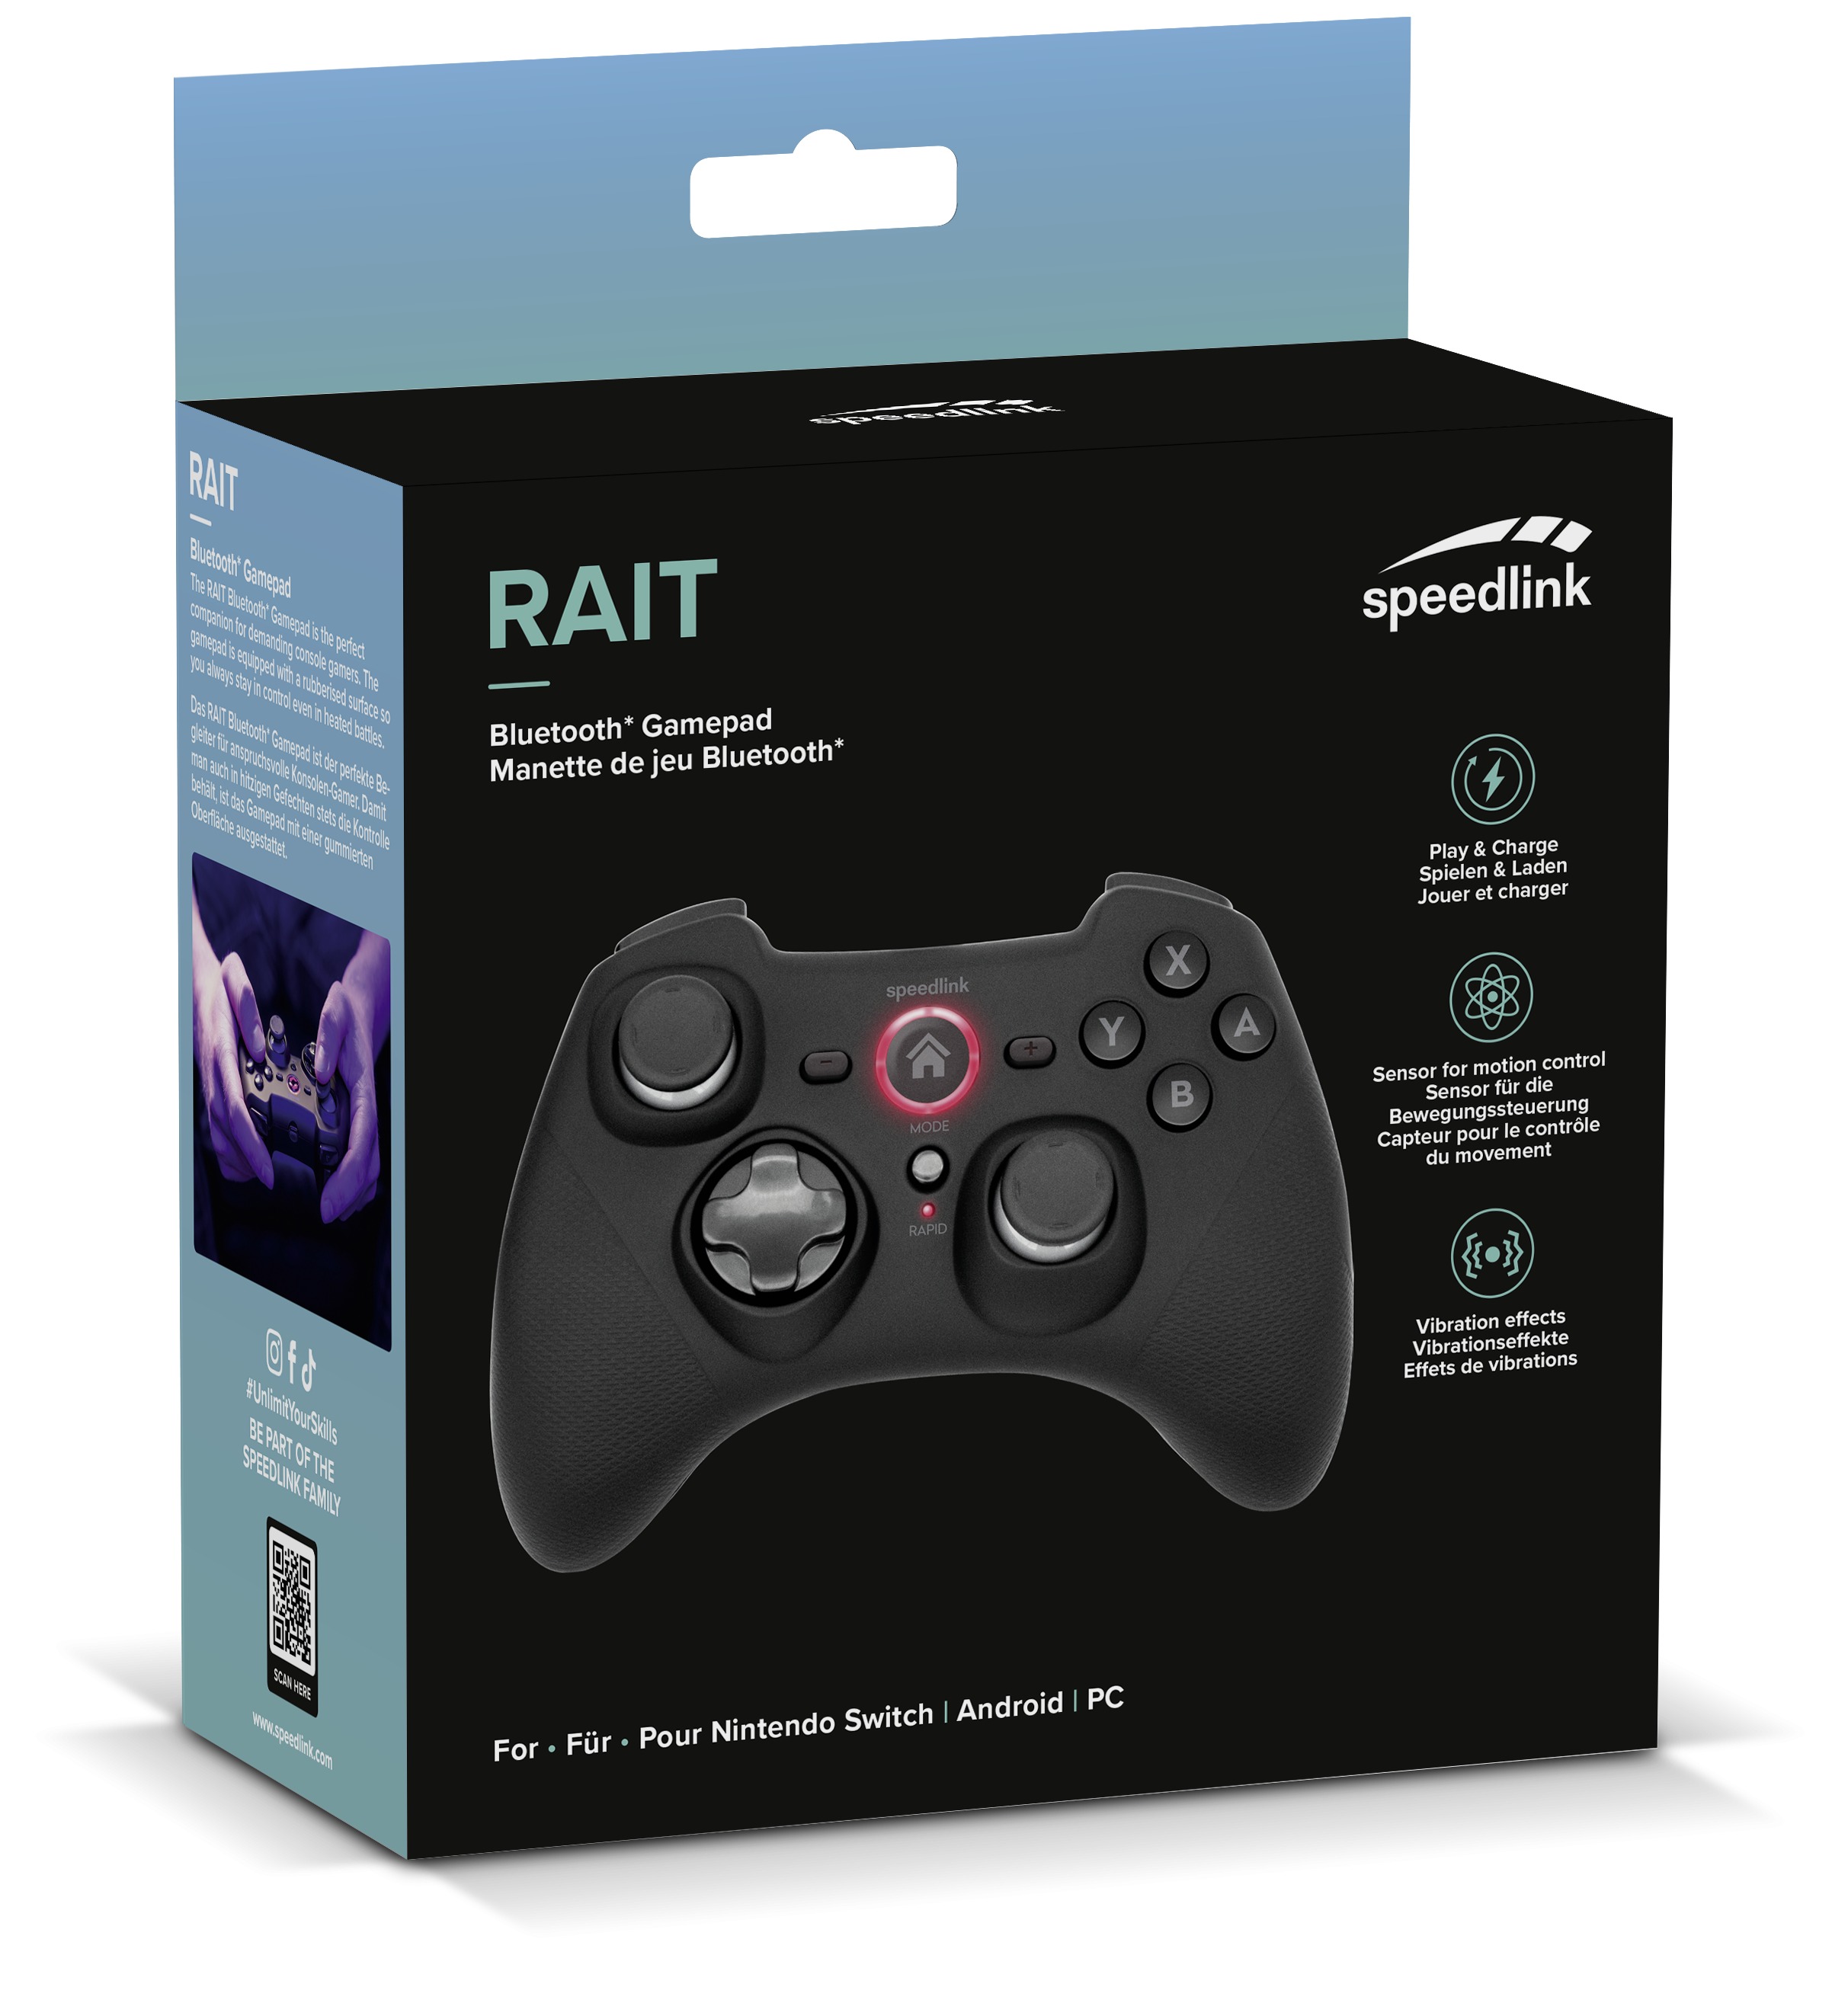 RAIT Bluetooth Gamepad - for Nintendo Switch/OLED/PC/Android, rubber-black  | SL-330402-RRBK